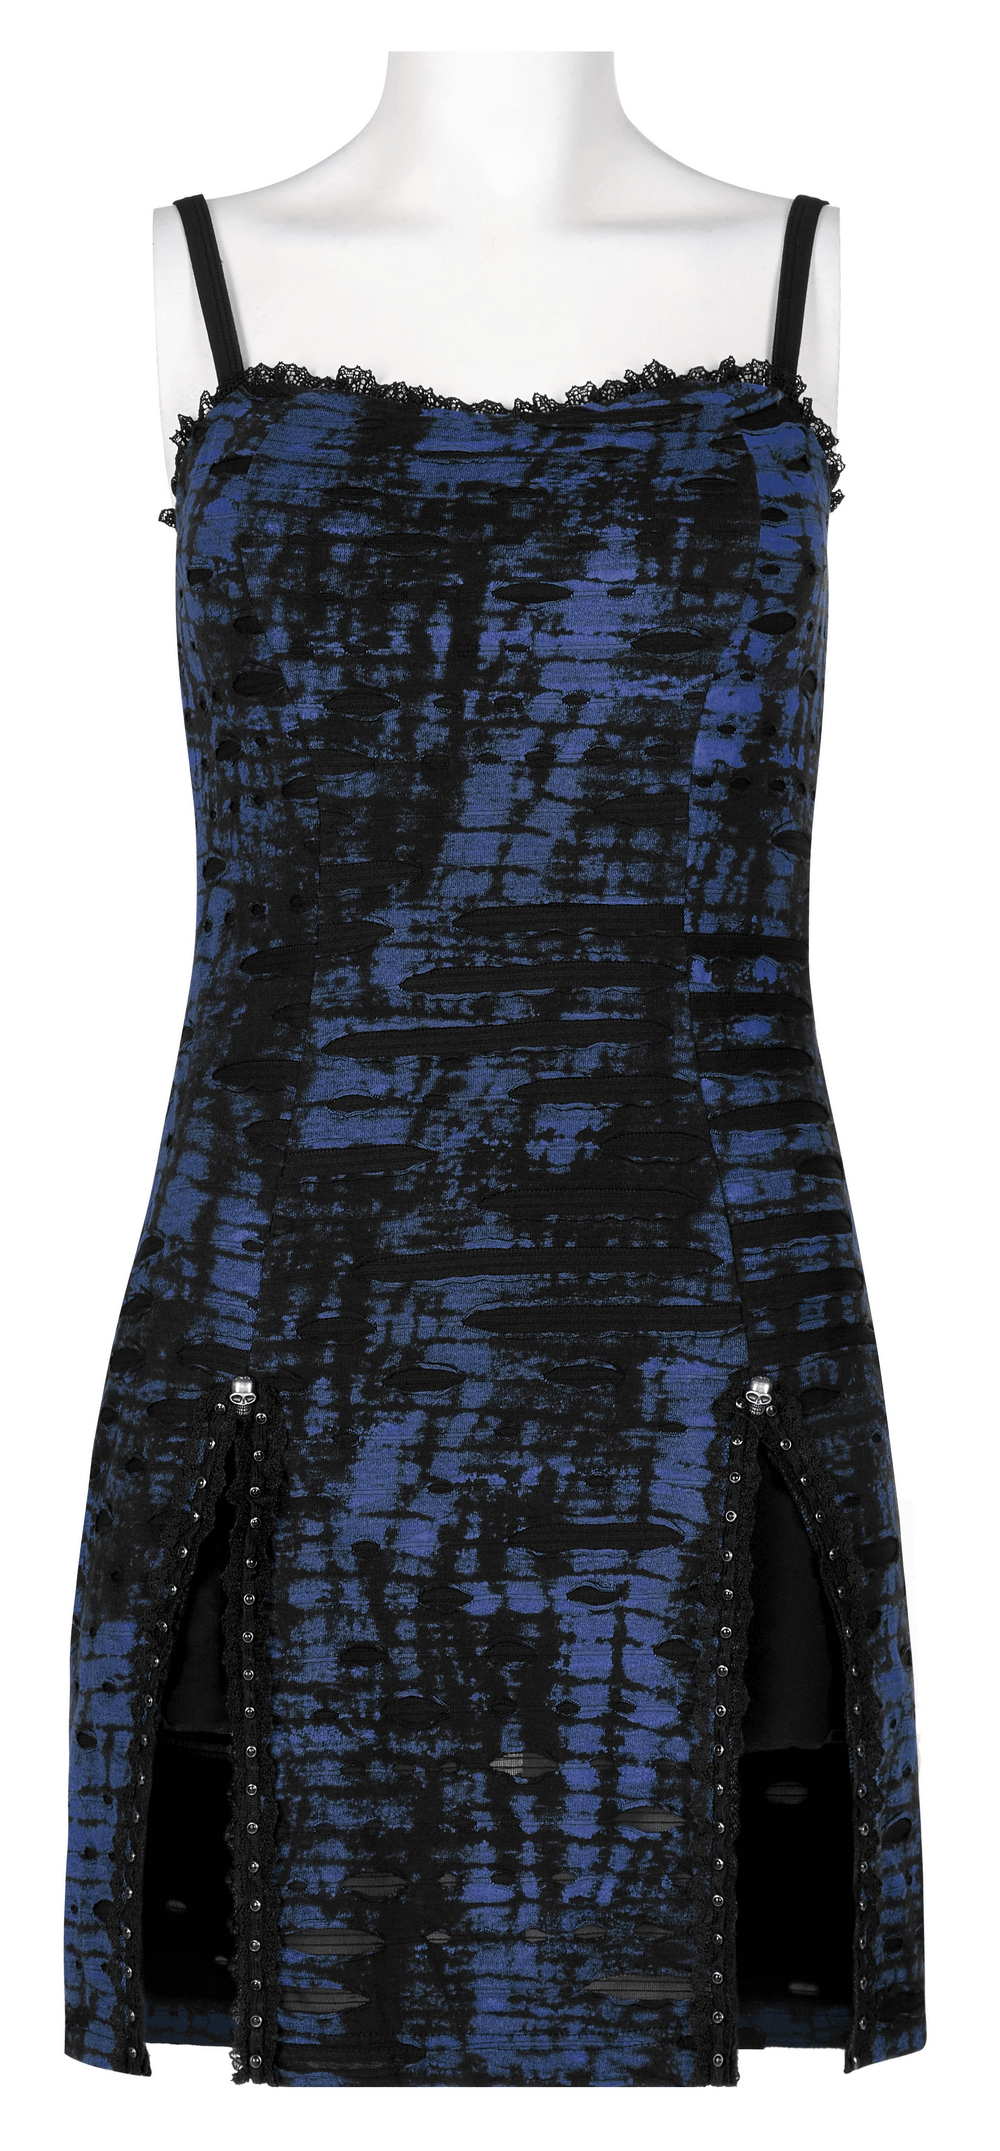 Edgy Women's Sequin Mini Dress with Lace Detail - HARD'N'HEAVY